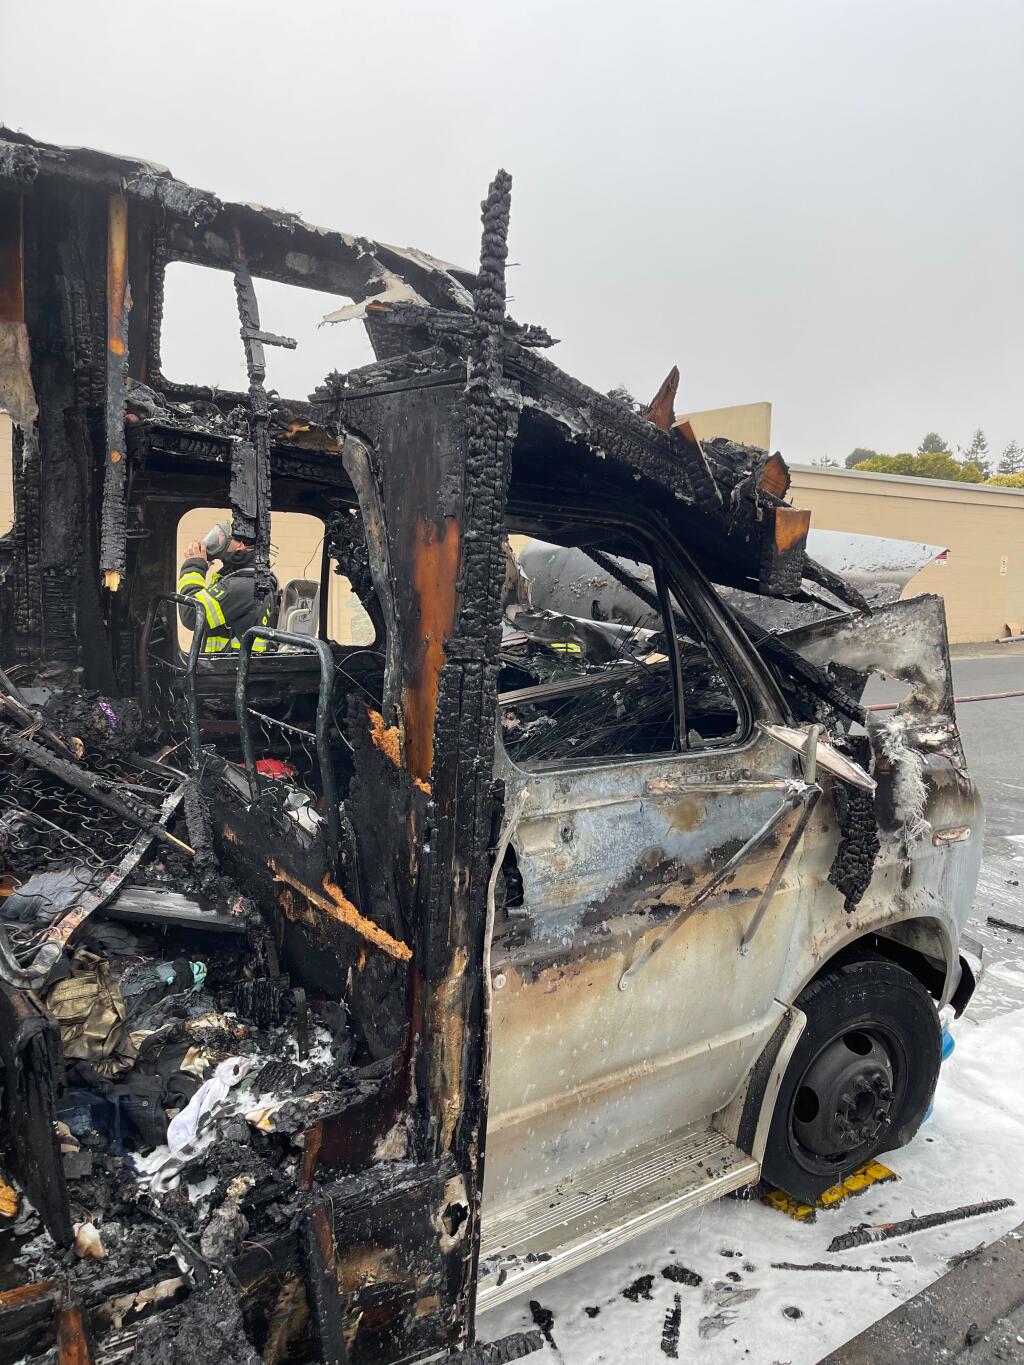 A fire destroyed an RV, which appeared to be someone’s living space, that was parked in Bellevue, Thursday, Aug. 17, 2023. The Sonoma County Fire District was dispatched about 6:37 a.m. to the fire and knocked down the flames in about 10 minutes, spokesperson Karen Hancock said. (Sonoma County Fire District)